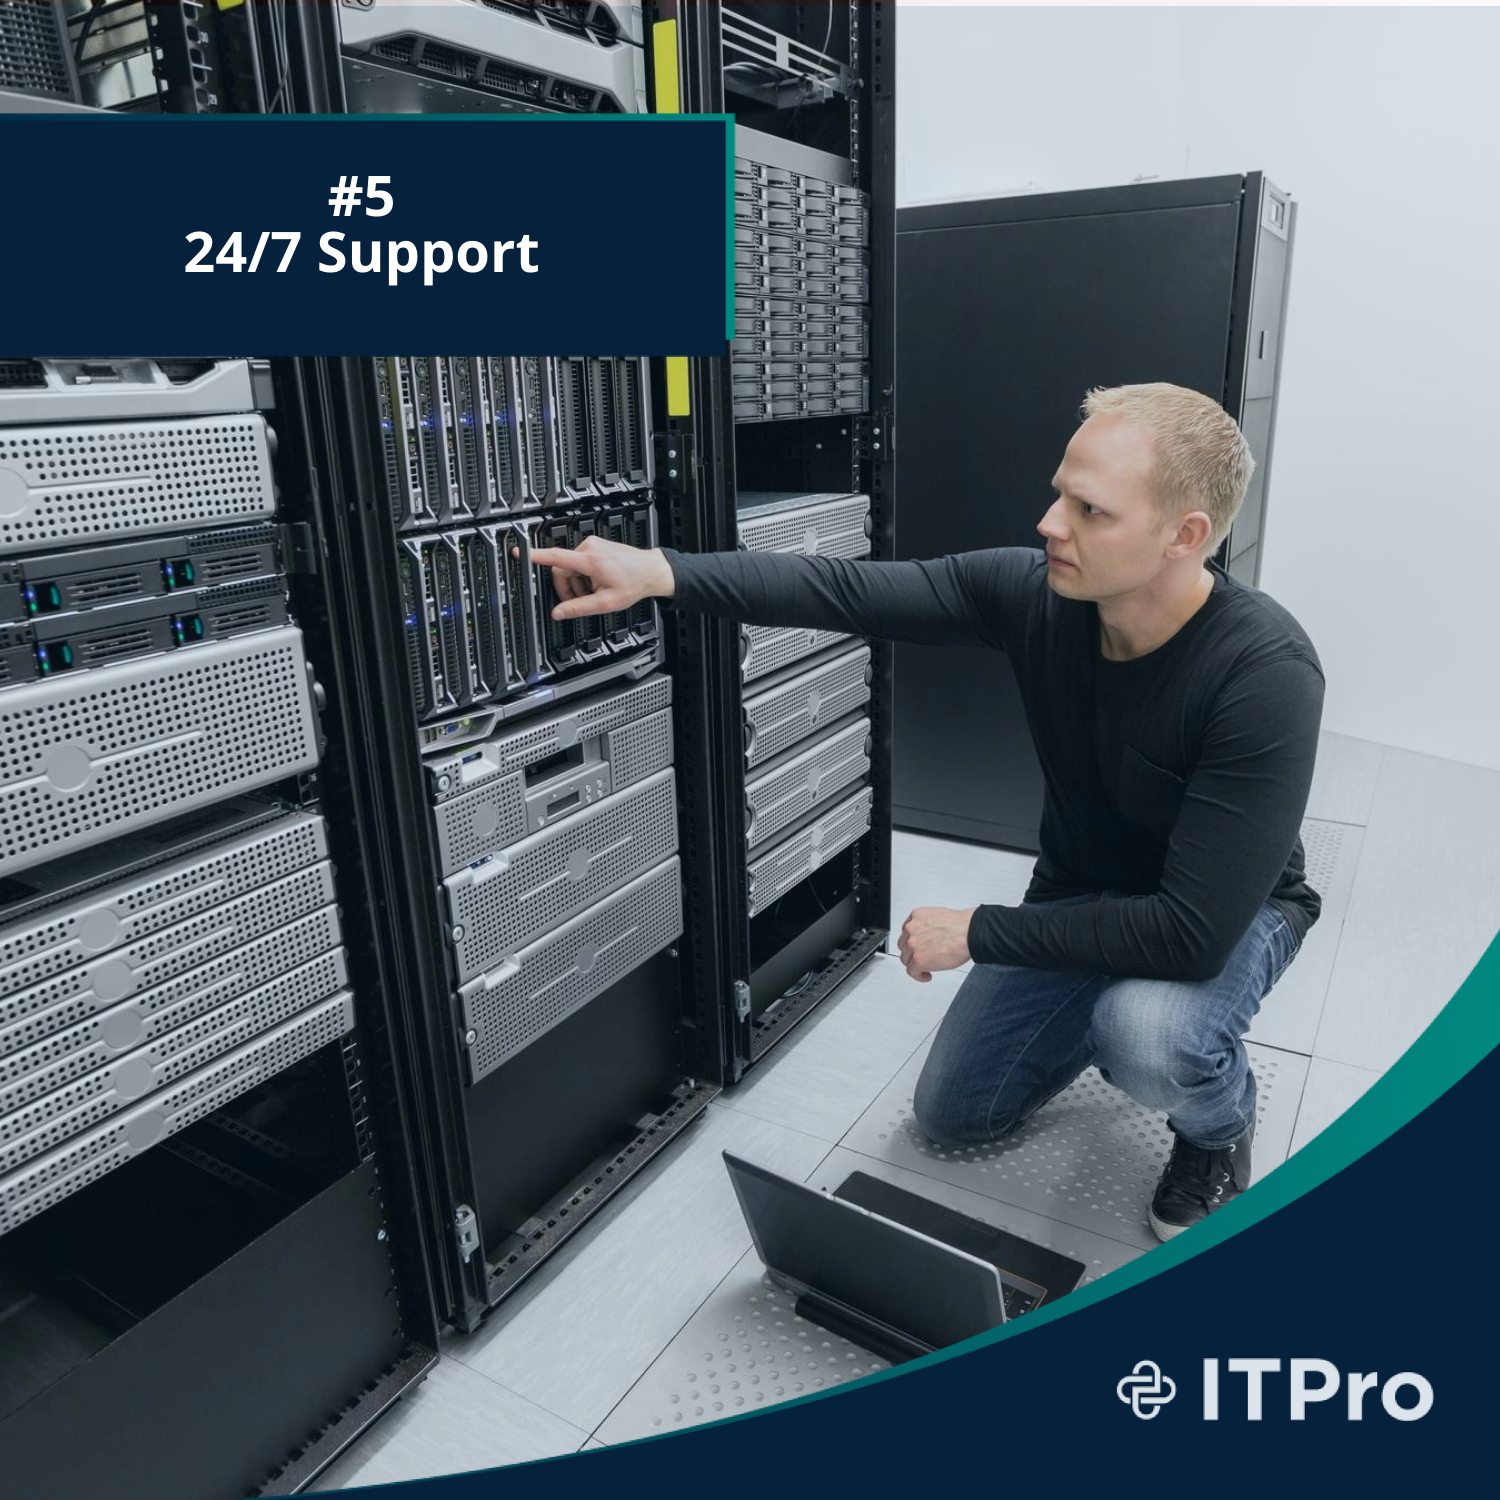 #5 Support - Benefits of 24/7 IT support for businesses